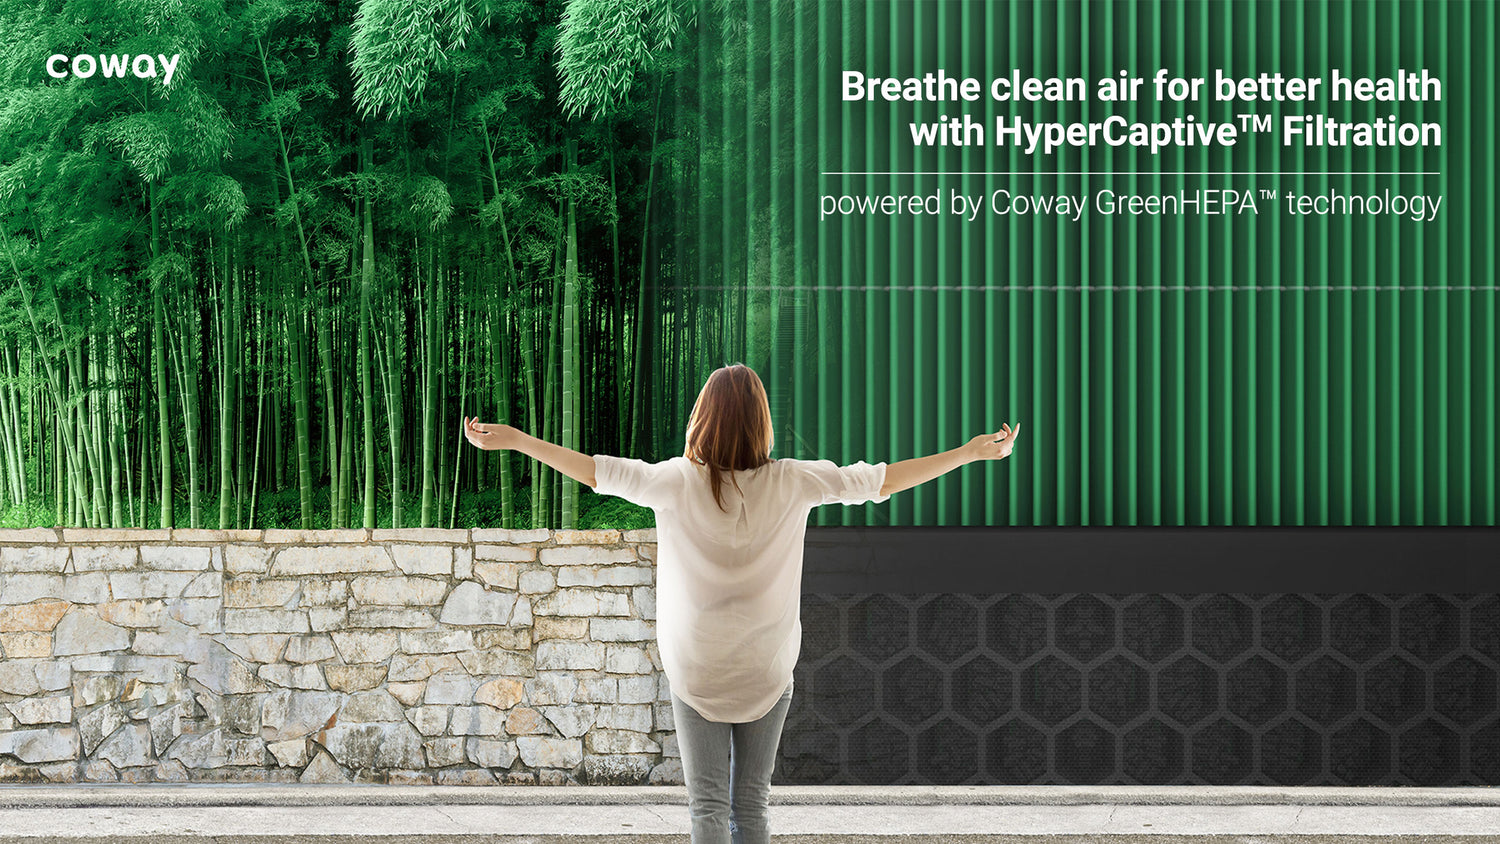 breathe clean air with hyperactive filtration